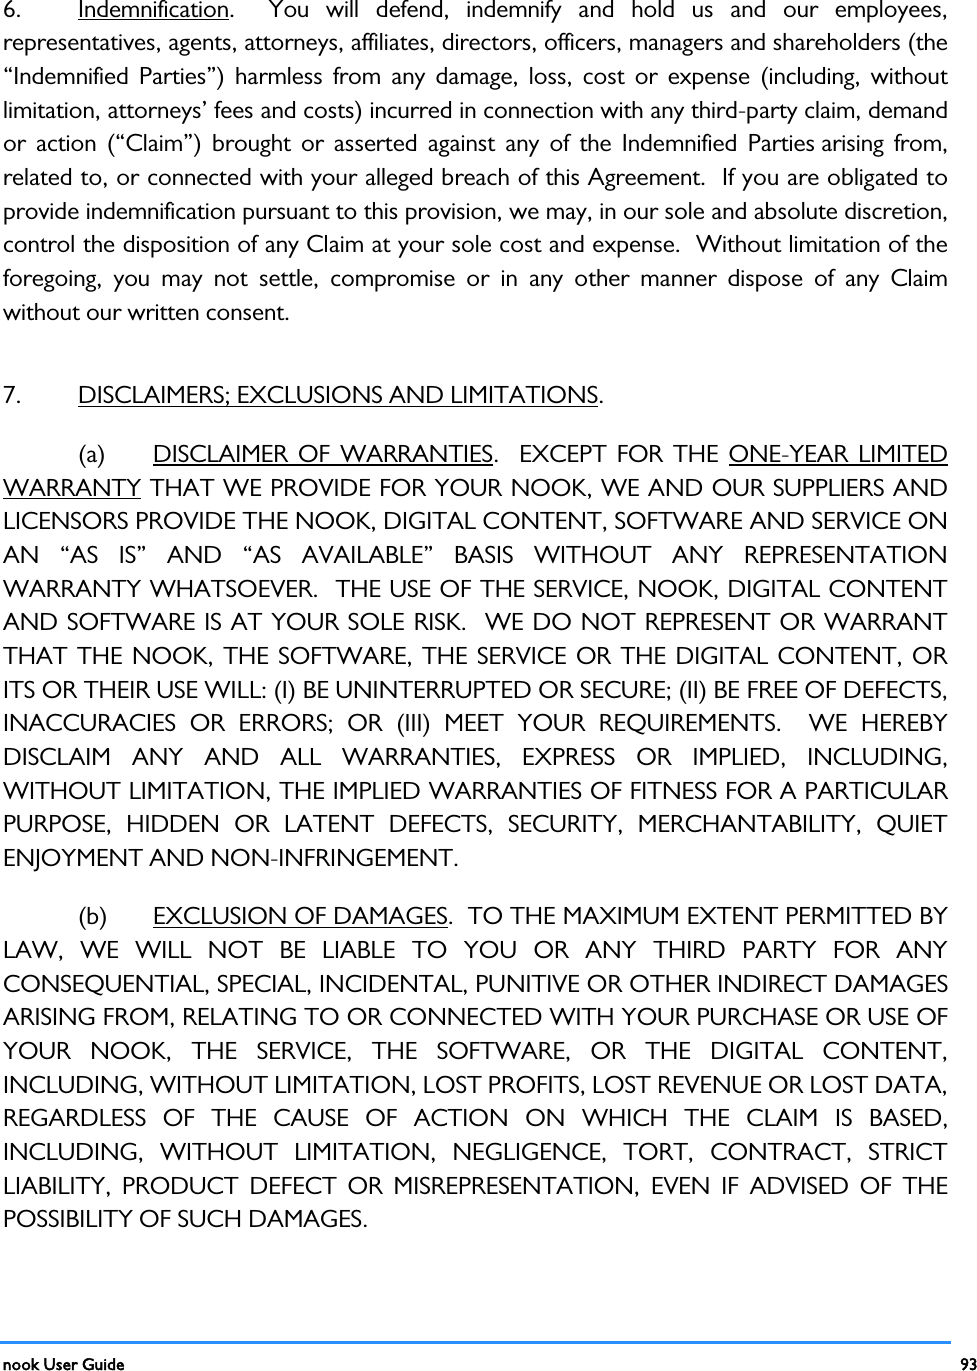  nook User Guide    93        6.  Indemnification.  You will defend, indemnify and hold us and our employees, representatives, agents, attorneys, affiliates, directors, officers, managers and shareholders (the “Indemnified Parties”) harmless from any damage, loss, cost or expense (including, without limitation, attorneys’ fees and costs) incurred in connection with any third-party claim, demand or action (“Claim”) brought or asserted against any of the Indemnified Parties arising from, related to, or connected with your alleged breach of this Agreement.  If you are obligated to provide indemnification pursuant to this provision, we may, in our sole and absolute discretion, control the disposition of any Claim at your sole cost and expense.  Without limitation of the foregoing, you may not settle, compromise or in any other manner dispose of any Claim without our written consent.   7.  DISCLAIMERS; EXCLUSIONS AND LIMITATIONS. (a) DISCLAIMER OF WARRANTIES.  EXCEPT FOR THE ONE-YEAR LIMITED WARRANTY THAT WE PROVIDE FOR YOUR NOOK, WE AND OUR SUPPLIERS AND LICENSORS PROVIDE THE NOOK, DIGITAL CONTENT, SOFTWARE AND SERVICE ON AN “AS IS” AND “AS AVAILABLE” BASIS WITHOUT ANY REPRESENTATION WARRANTY WHATSOEVER.  THE USE OF THE SERVICE, NOOK, DIGITAL CONTENT AND SOFTWARE IS AT YOUR SOLE RISK.  WE DO NOT REPRESENT OR WARRANT THAT THE NOOK, THE SOFTWARE, THE SERVICE OR THE DIGITAL CONTENT, OR ITS OR THEIR USE WILL: (I) BE UNINTERRUPTED OR SECURE; (II) BE FREE OF DEFECTS, INACCURACIES OR ERRORS; OR (III) MEET YOUR REQUIREMENTS.  WE HEREBY DISCLAIM ANY AND ALL WARRANTIES, EXPRESS OR IMPLIED, INCLUDING, WITHOUT LIMITATION, THE IMPLIED WARRANTIES OF FITNESS FOR A PARTICULAR PURPOSE, HIDDEN OR LATENT DEFECTS, SECURITY, MERCHANTABILITY, QUIET ENJOYMENT AND NON-INFRINGEMENT.   (b) EXCLUSION OF DAMAGES.  TO THE MAXIMUM EXTENT PERMITTED BY LAW, WE WILL NOT BE LIABLE TO YOU OR ANY THIRD PARTY FOR ANY CONSEQUENTIAL, SPECIAL, INCIDENTAL, PUNITIVE OR OTHER INDIRECT DAMAGES ARISING FROM, RELATING TO OR CONNECTED WITH YOUR PURCHASE OR USE OF YOUR NOOK, THE SERVICE, THE SOFTWARE, OR THE DIGITAL CONTENT, INCLUDING, WITHOUT LIMITATION, LOST PROFITS, LOST REVENUE OR LOST DATA, REGARDLESS OF THE CAUSE OF ACTION ON WHICH THE CLAIM IS BASED, INCLUDING, WITHOUT LIMITATION, NEGLIGENCE, TORT, CONTRACT, STRICT LIABILITY, PRODUCT DEFECT OR MISREPRESENTATION, EVEN IF ADVISED OF THE POSSIBILITY OF SUCH DAMAGES. 